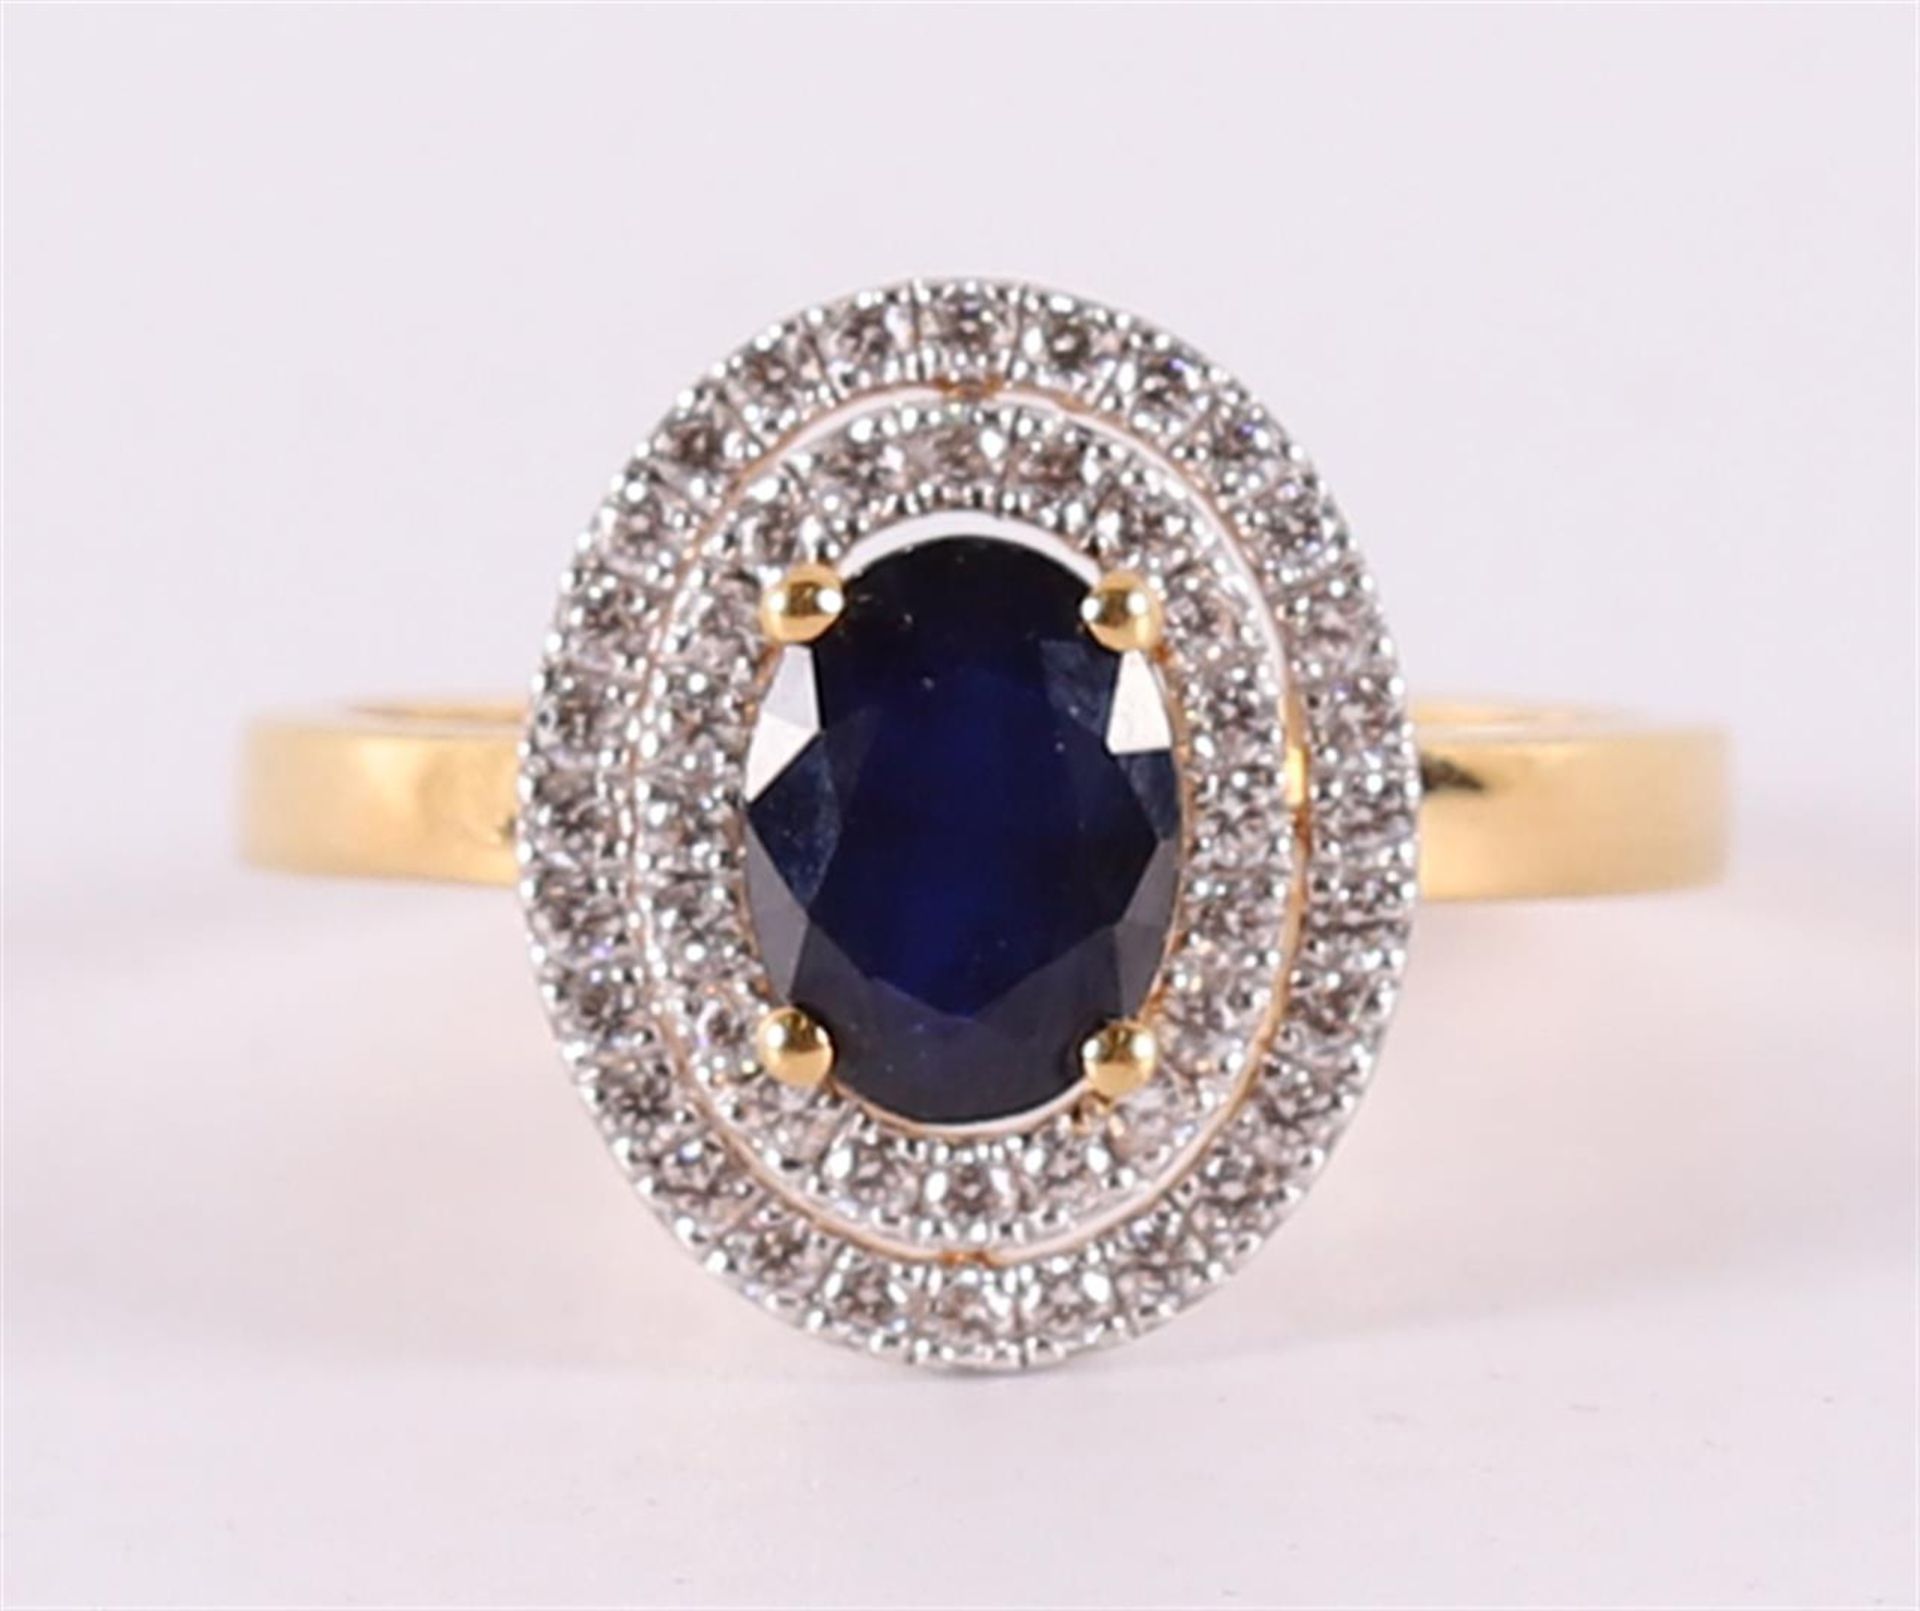 A 9 kt BWG ring with facet cut blue sapphire, flanked by zirconias